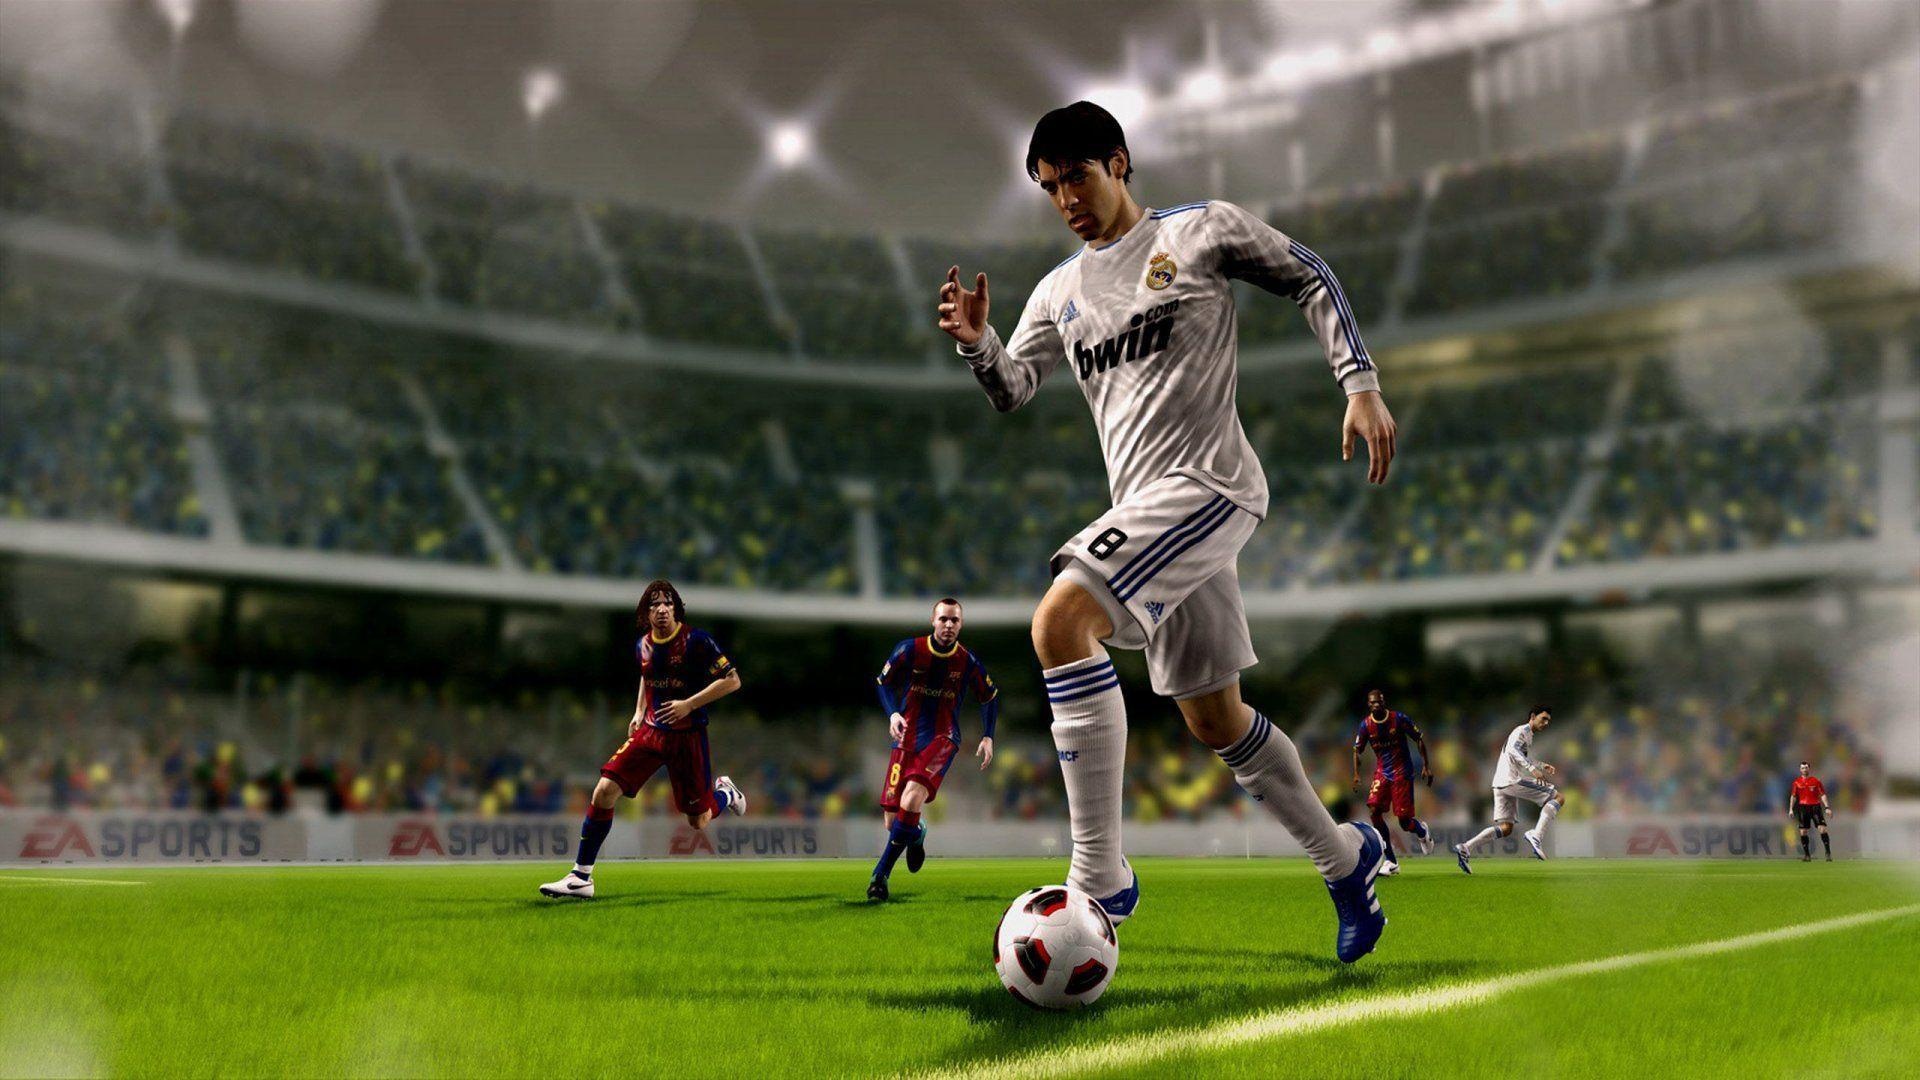 FIFA Soccer (Game): EA series beginning in late 1993, Released annually by Electronic Arts. 1920x1080 Full HD Wallpaper.